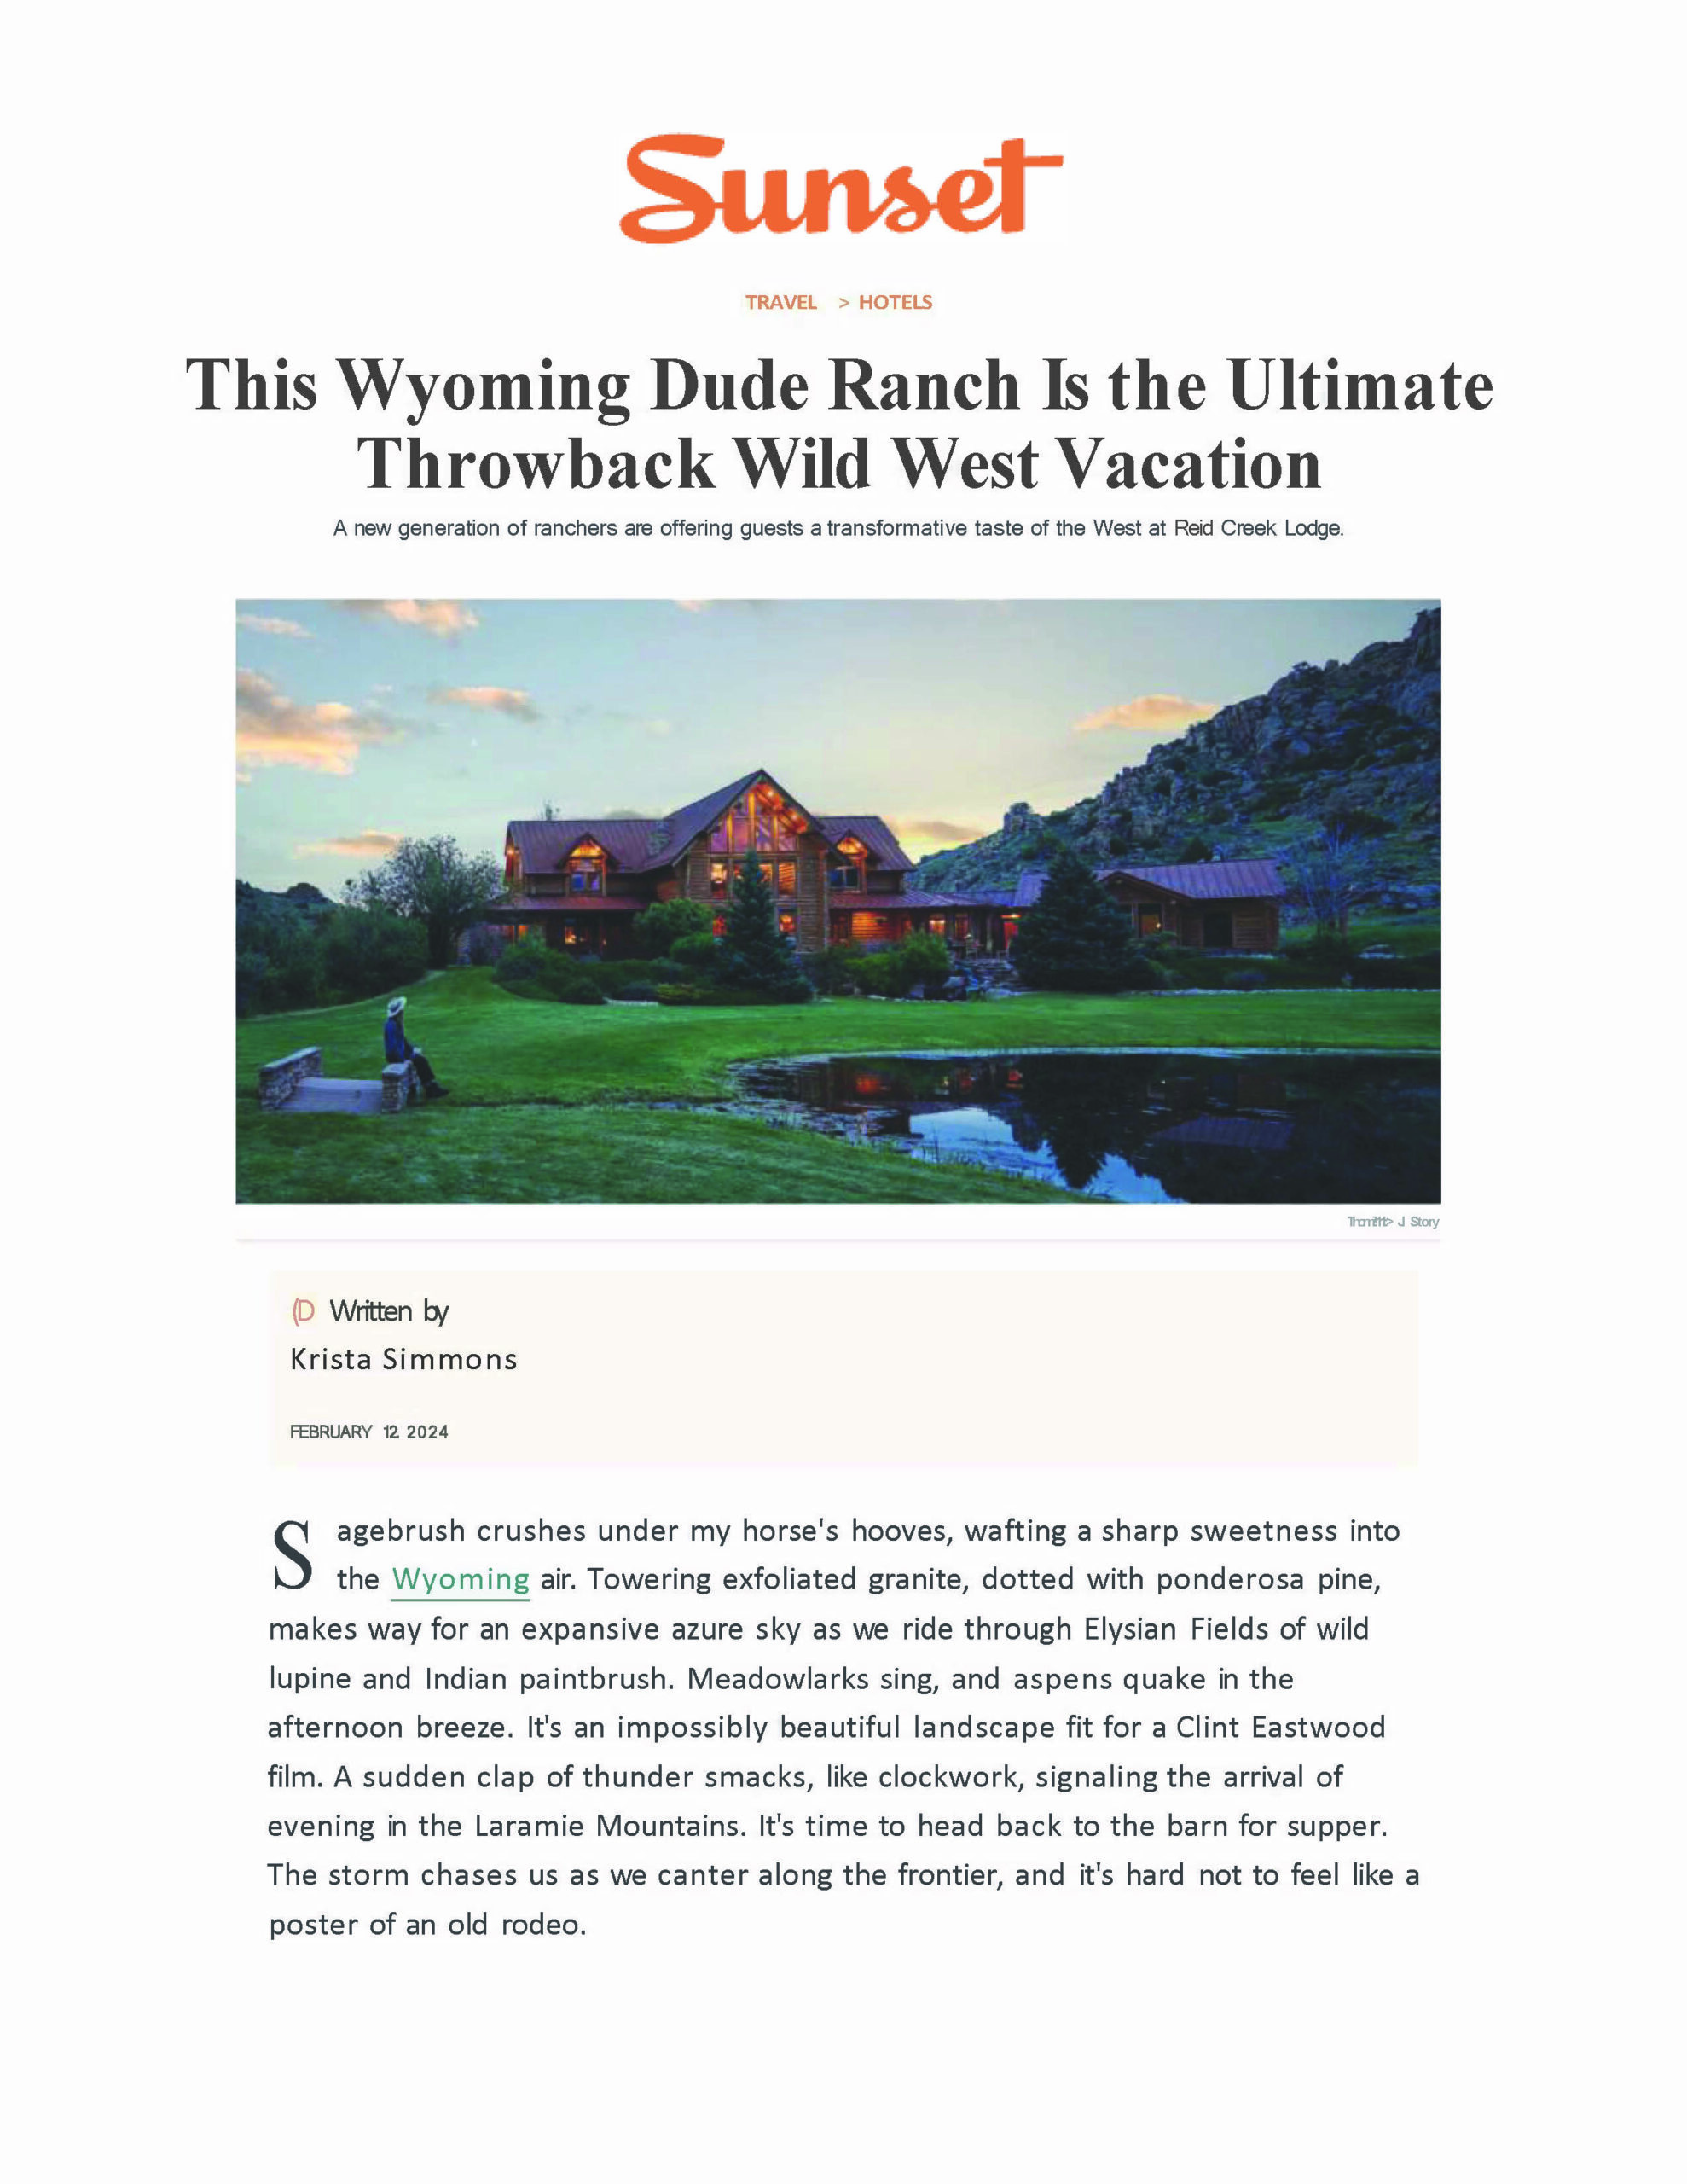 This Wyoming Dude Ranch Is The Ultimate Throwback Wild West Vacation